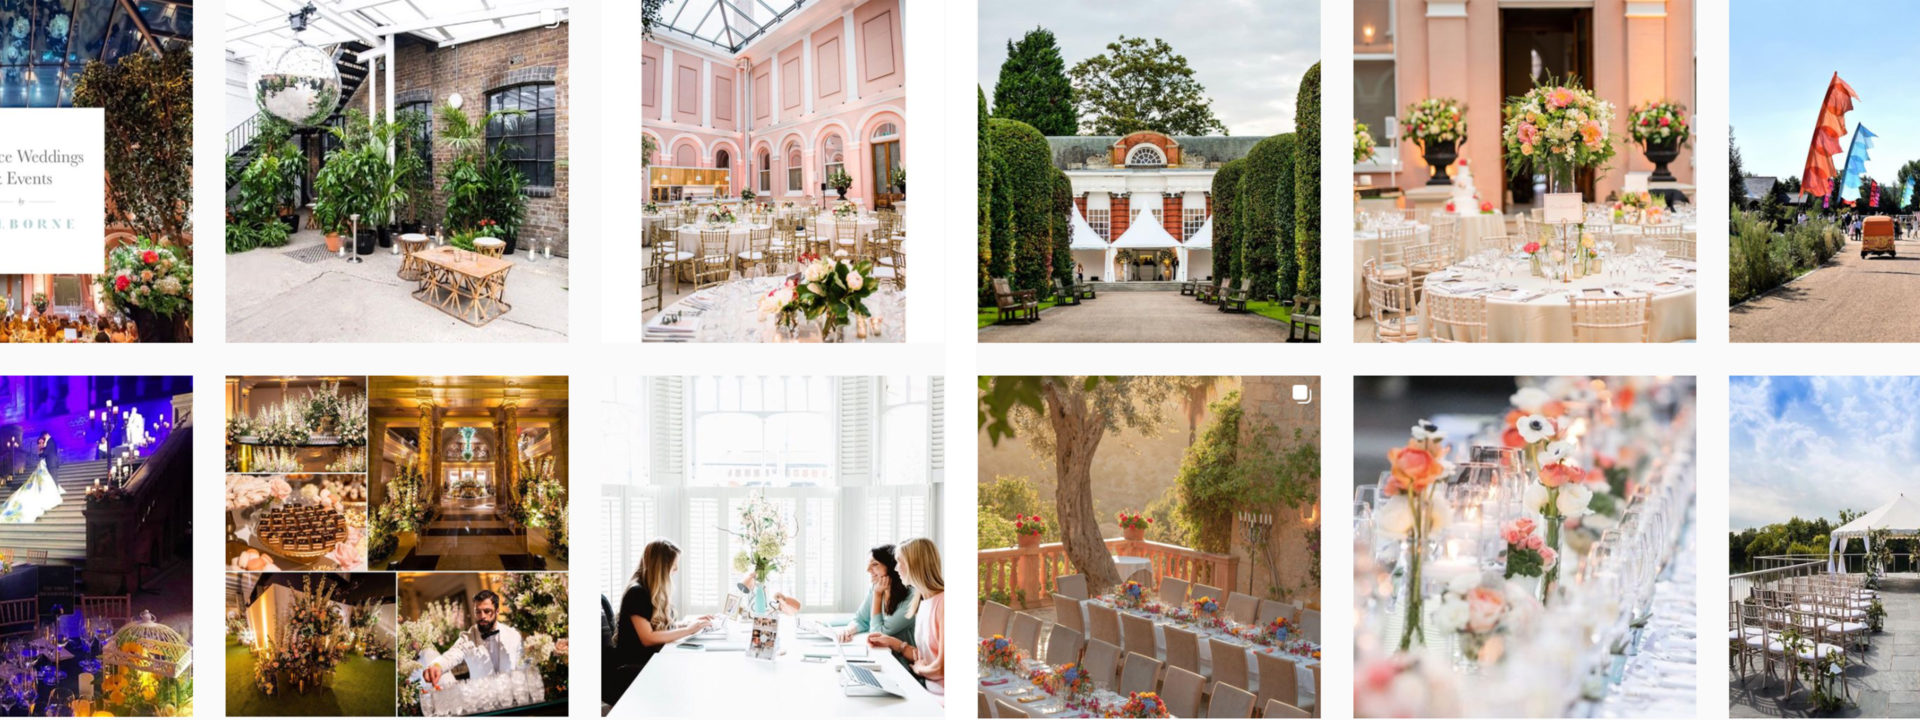 Instagram account with event planning inspiration images, like table settings and event venues